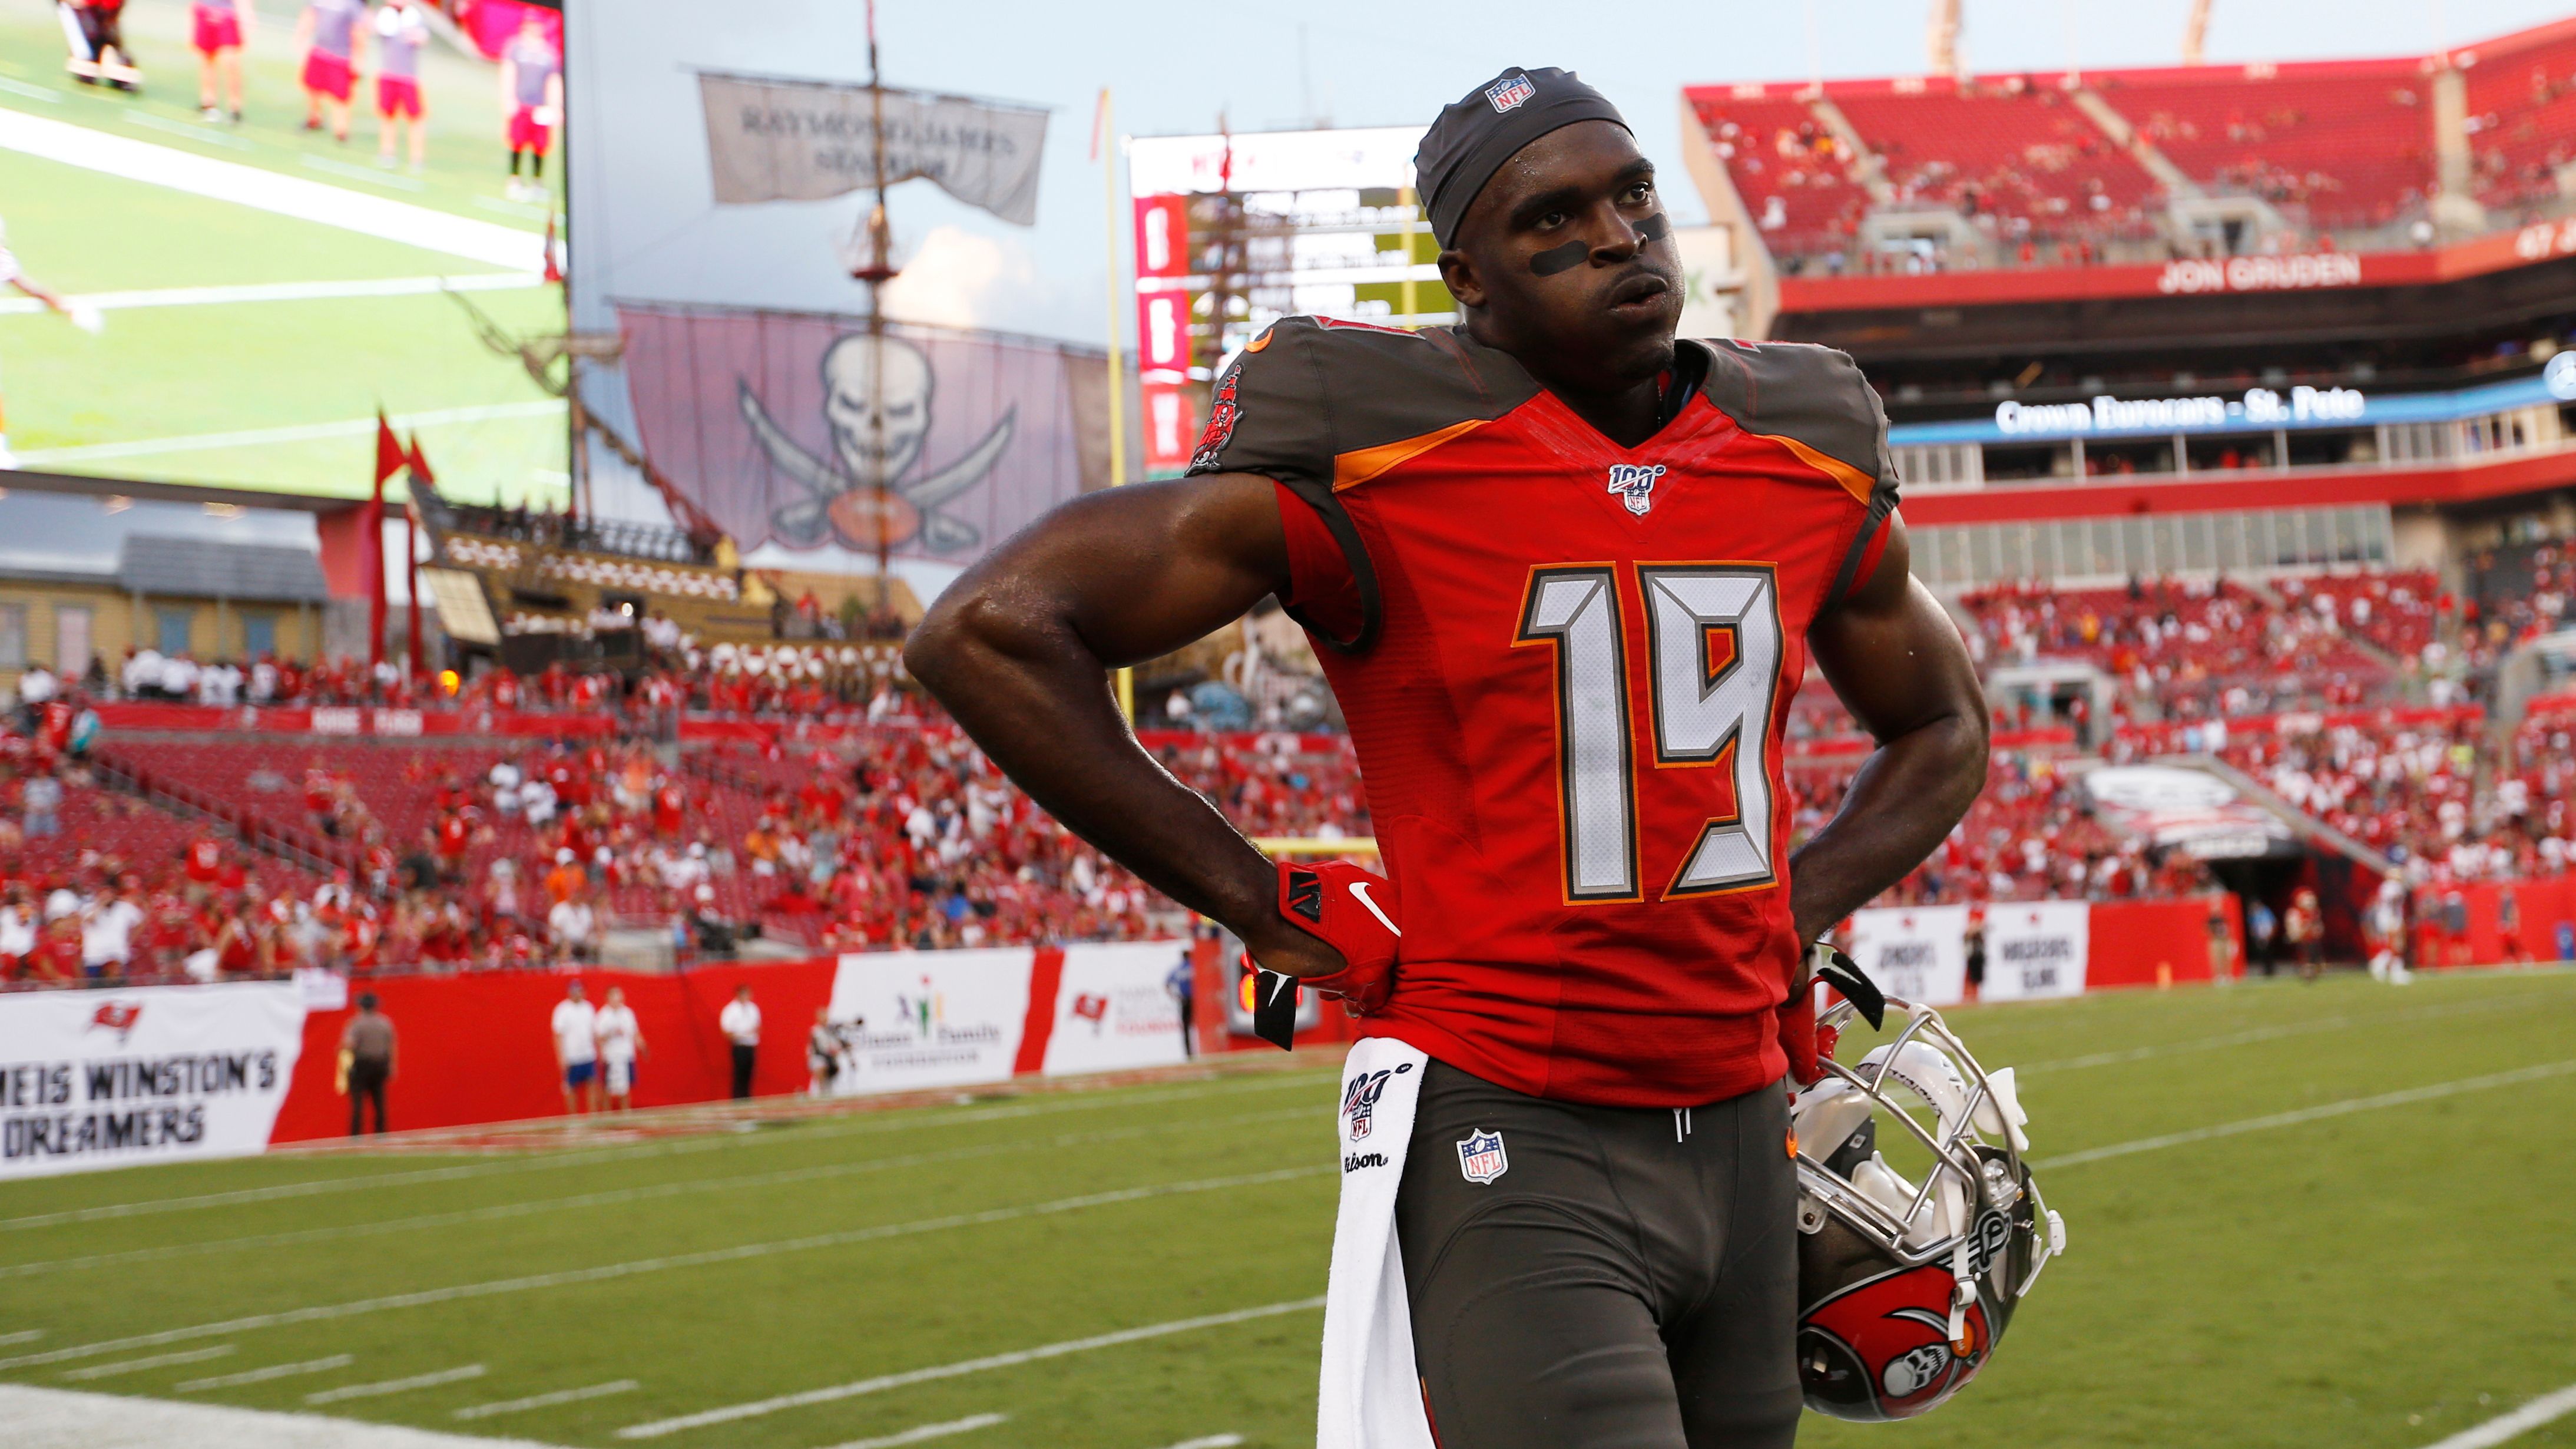 The Bucs' Breshad Perriman signing has morphed into a mess